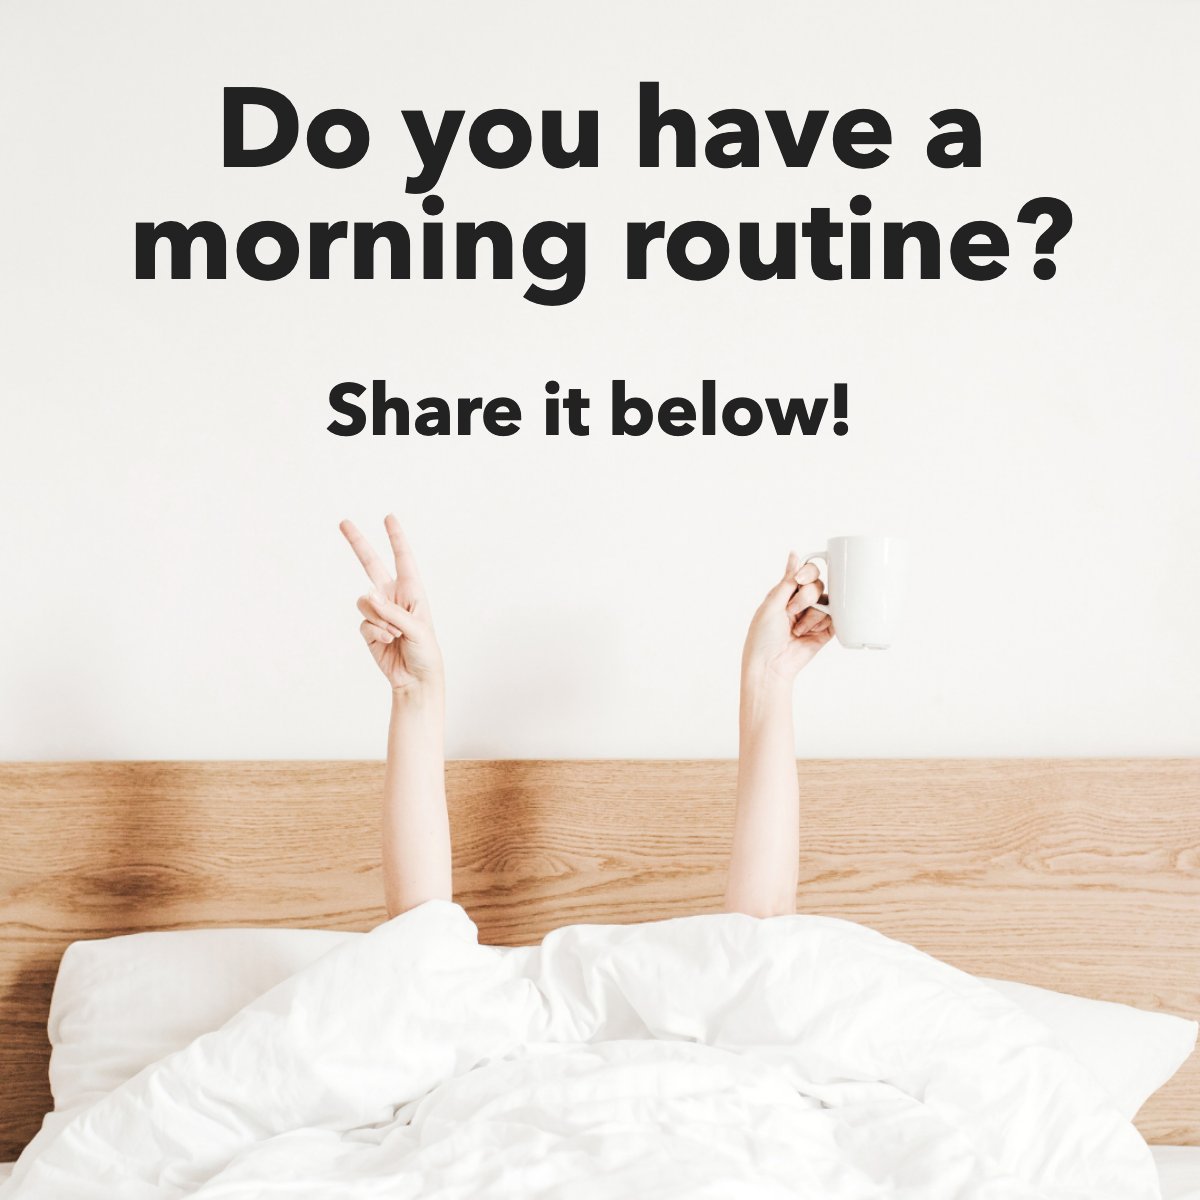 There is a perfect morning routine that will make YOU happy and productive all day, you just have to find yours. 🌞 ☕

#morningroutine #morningroutinegoals #morningroutineideas #dailyroutines
 #mainerealestate #homesforsale #floridarealestate #selleragent #buyeragent